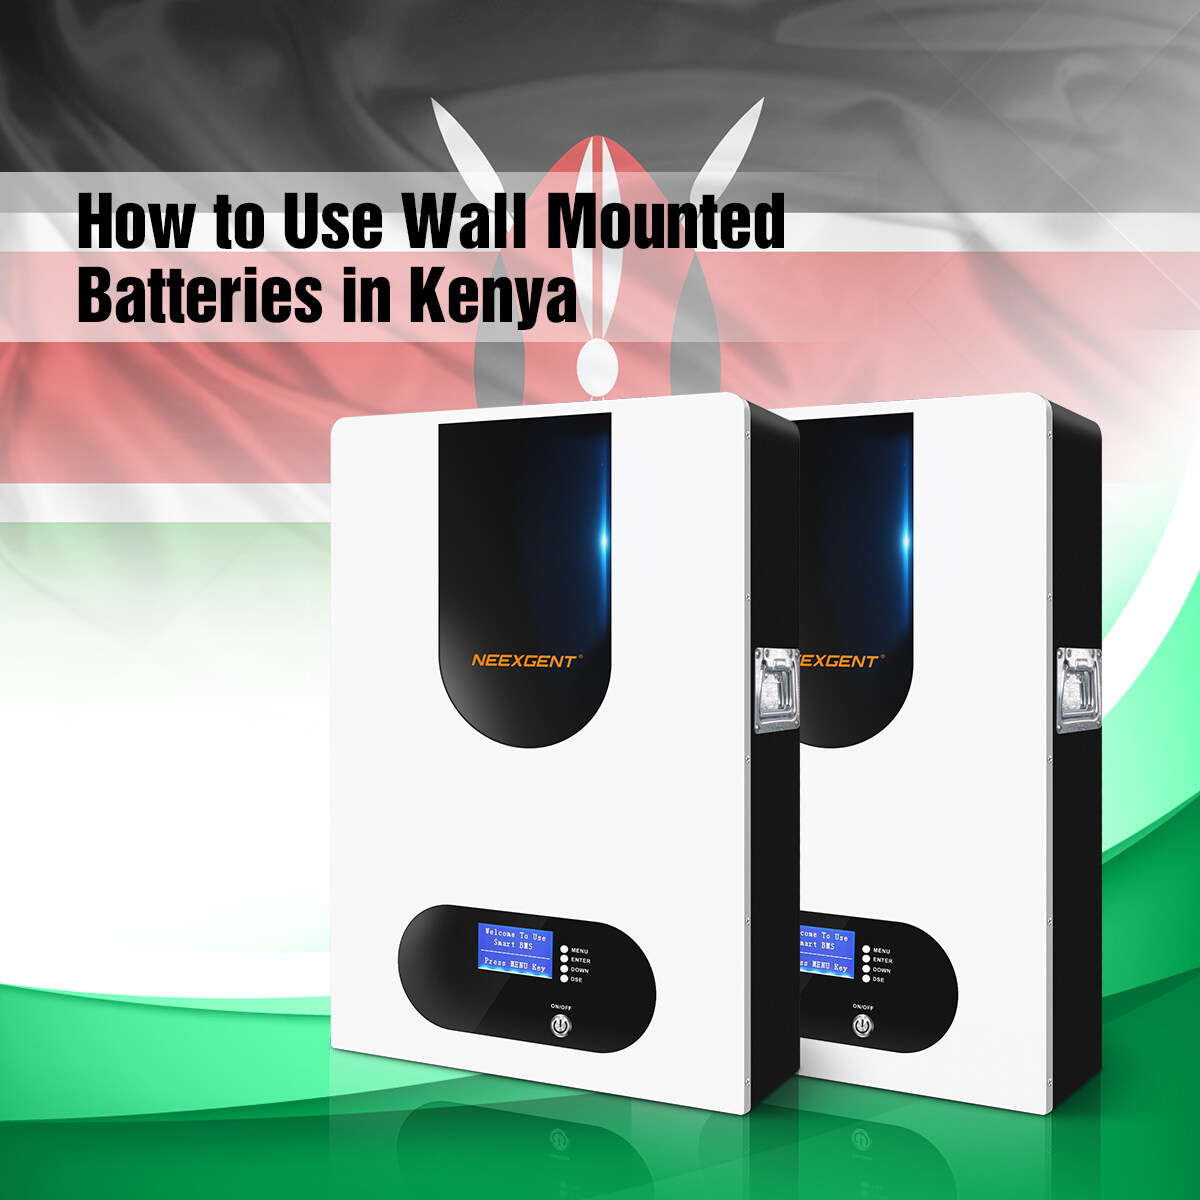 How to Use Wall Mounted Batteries in Kenya